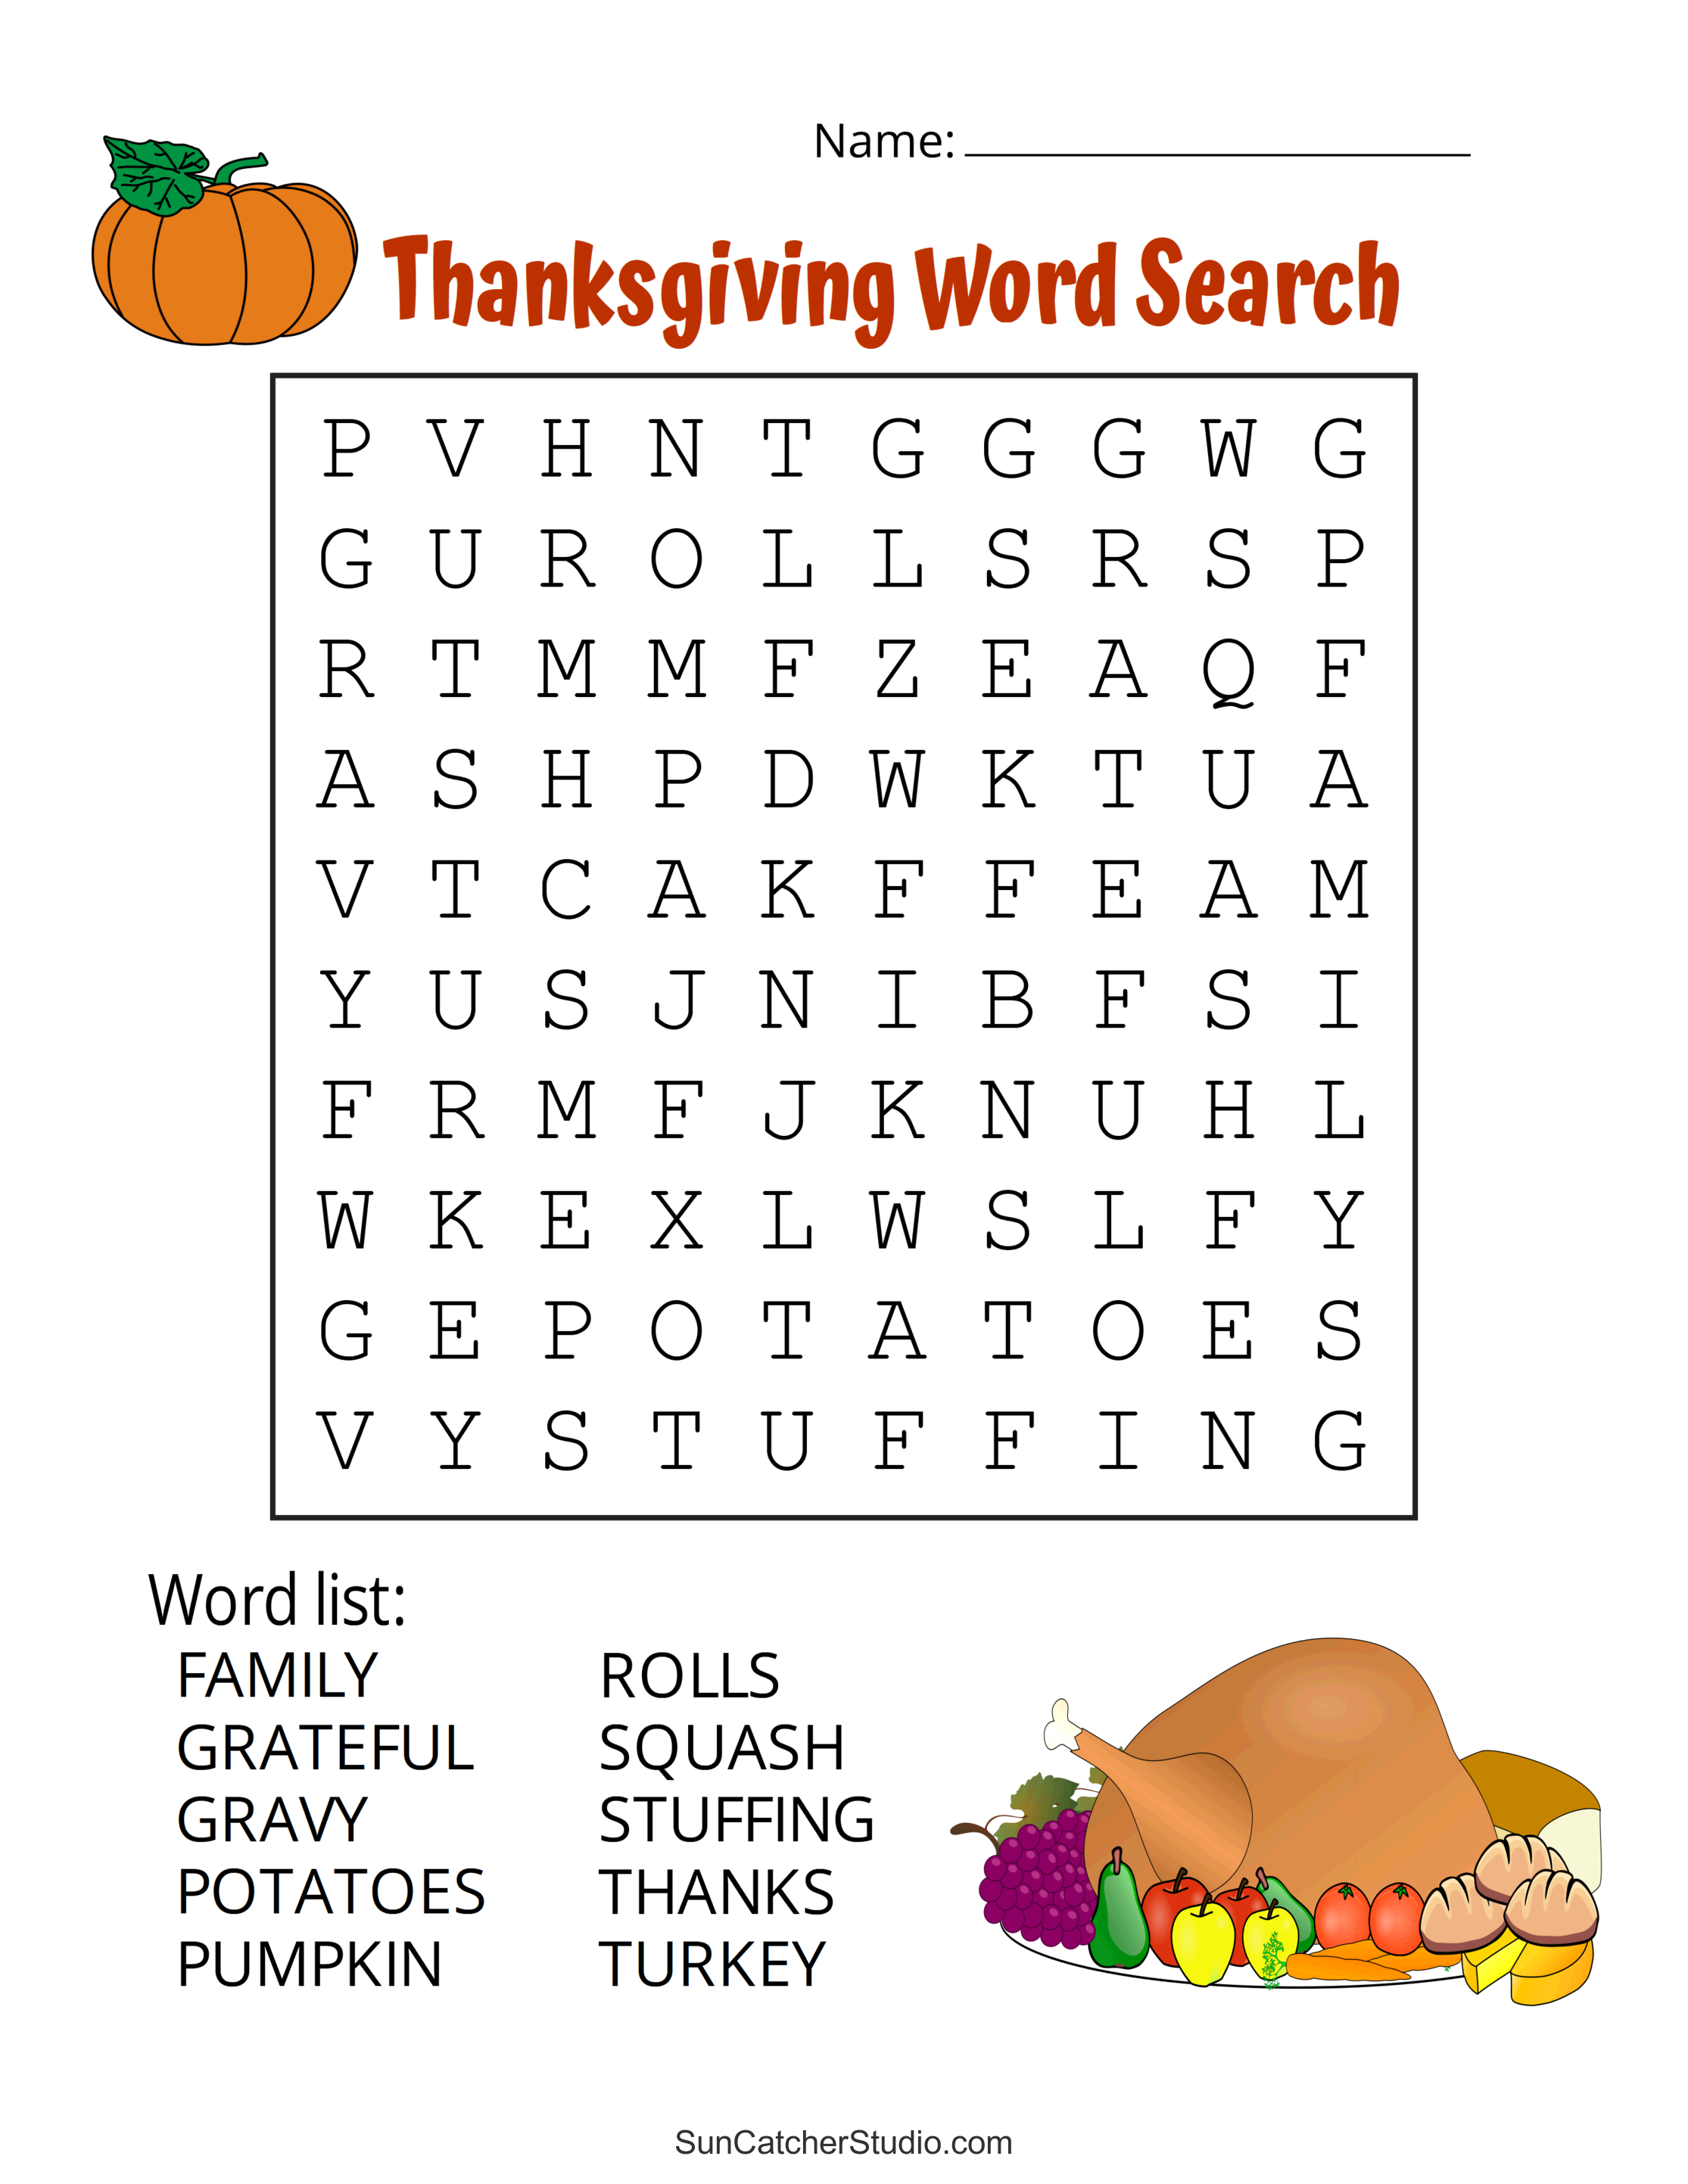 Thanksgiving Word Search (Free Printable Puzzles) – DIY Projects ...